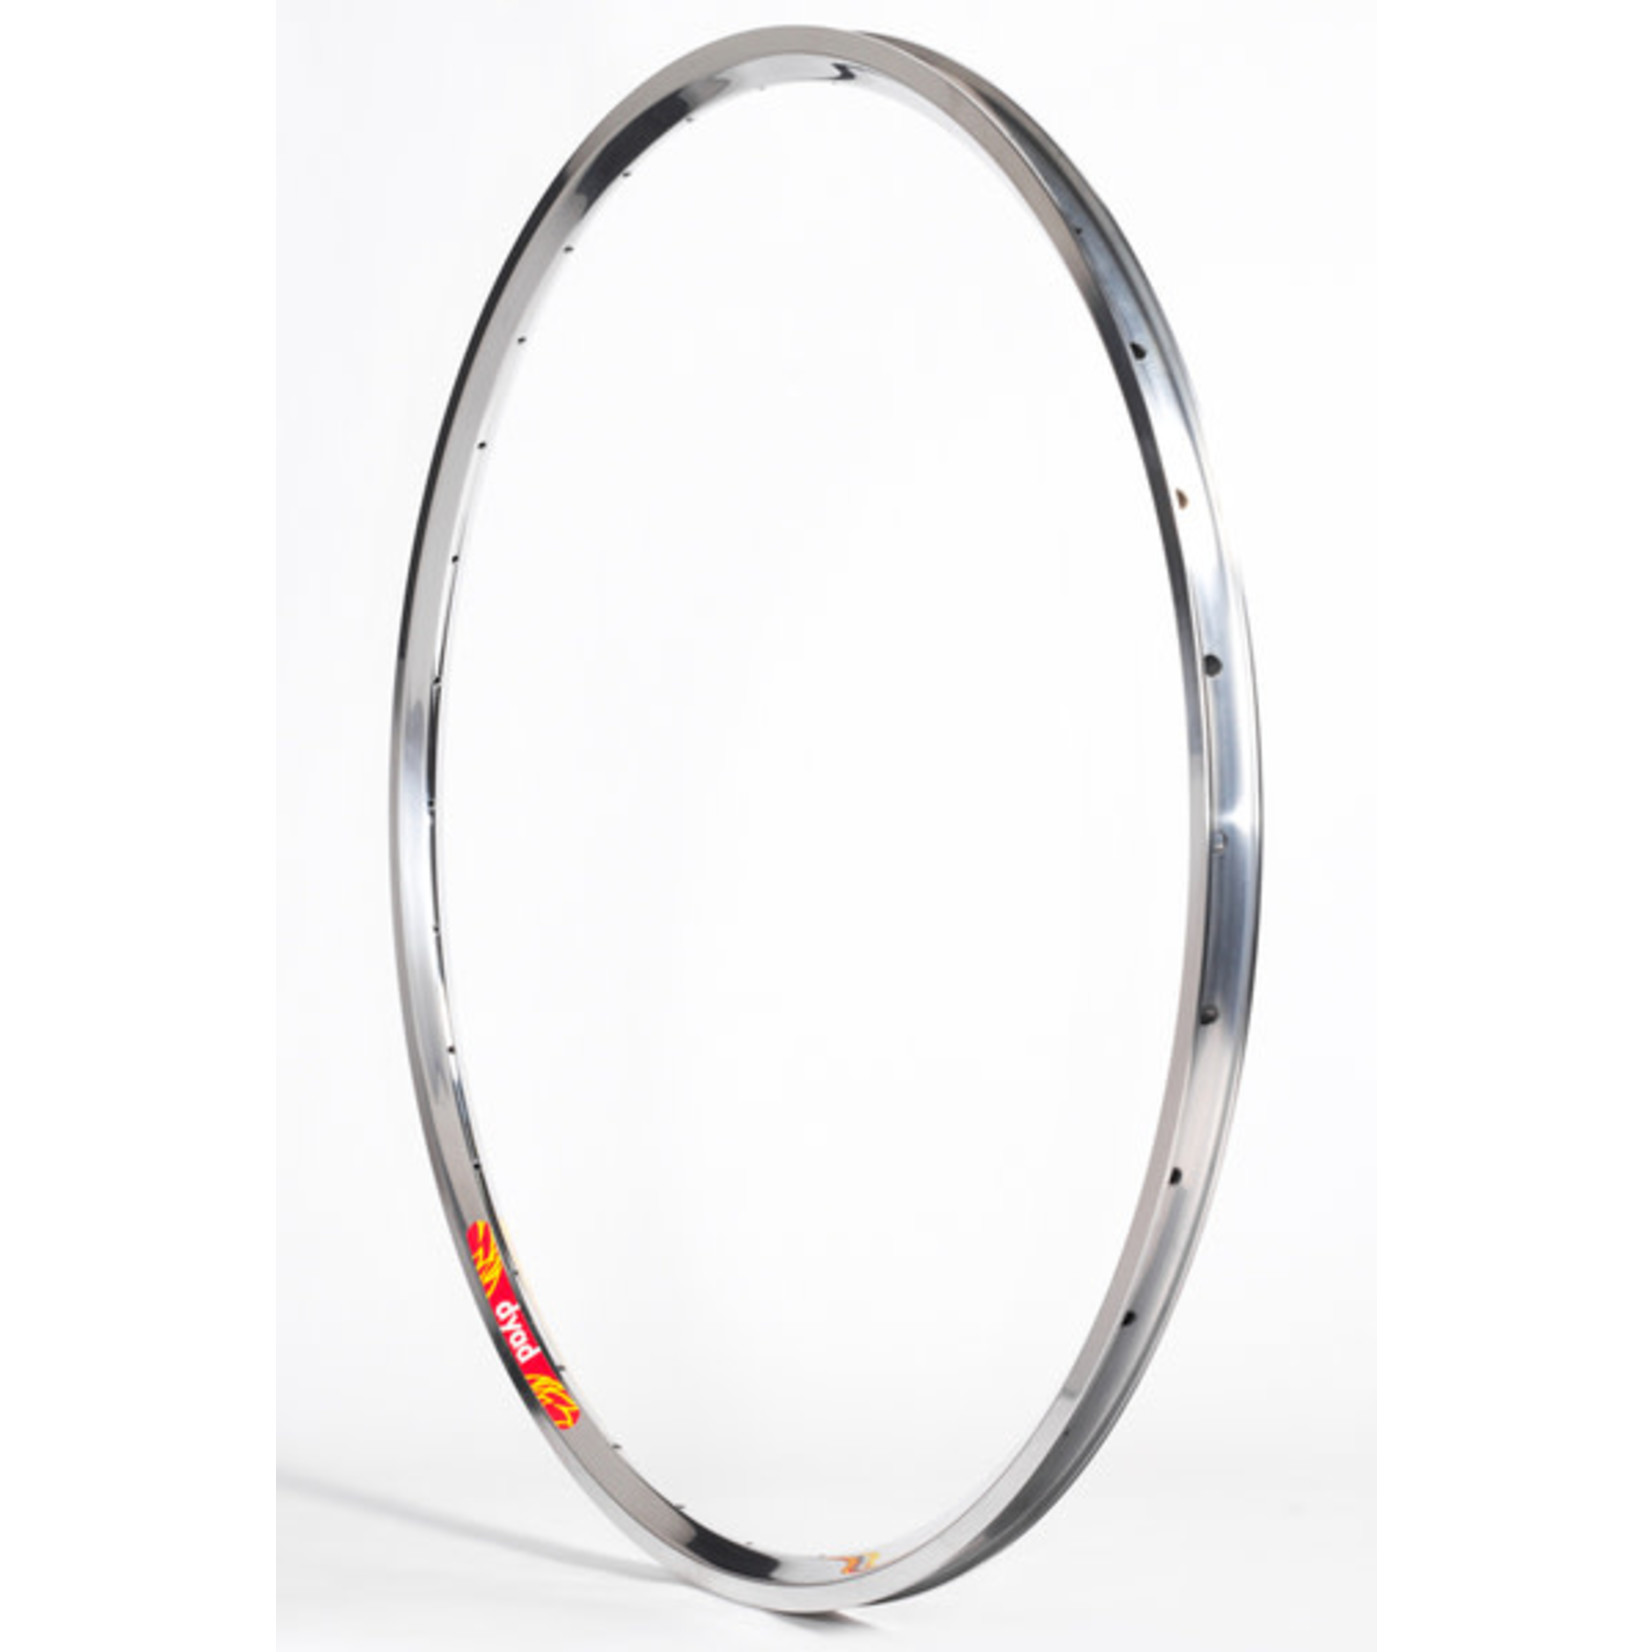 Velocity Velocity Dyad 700c nonMSW Bicycle Rims - POLISHED SILVER ,36